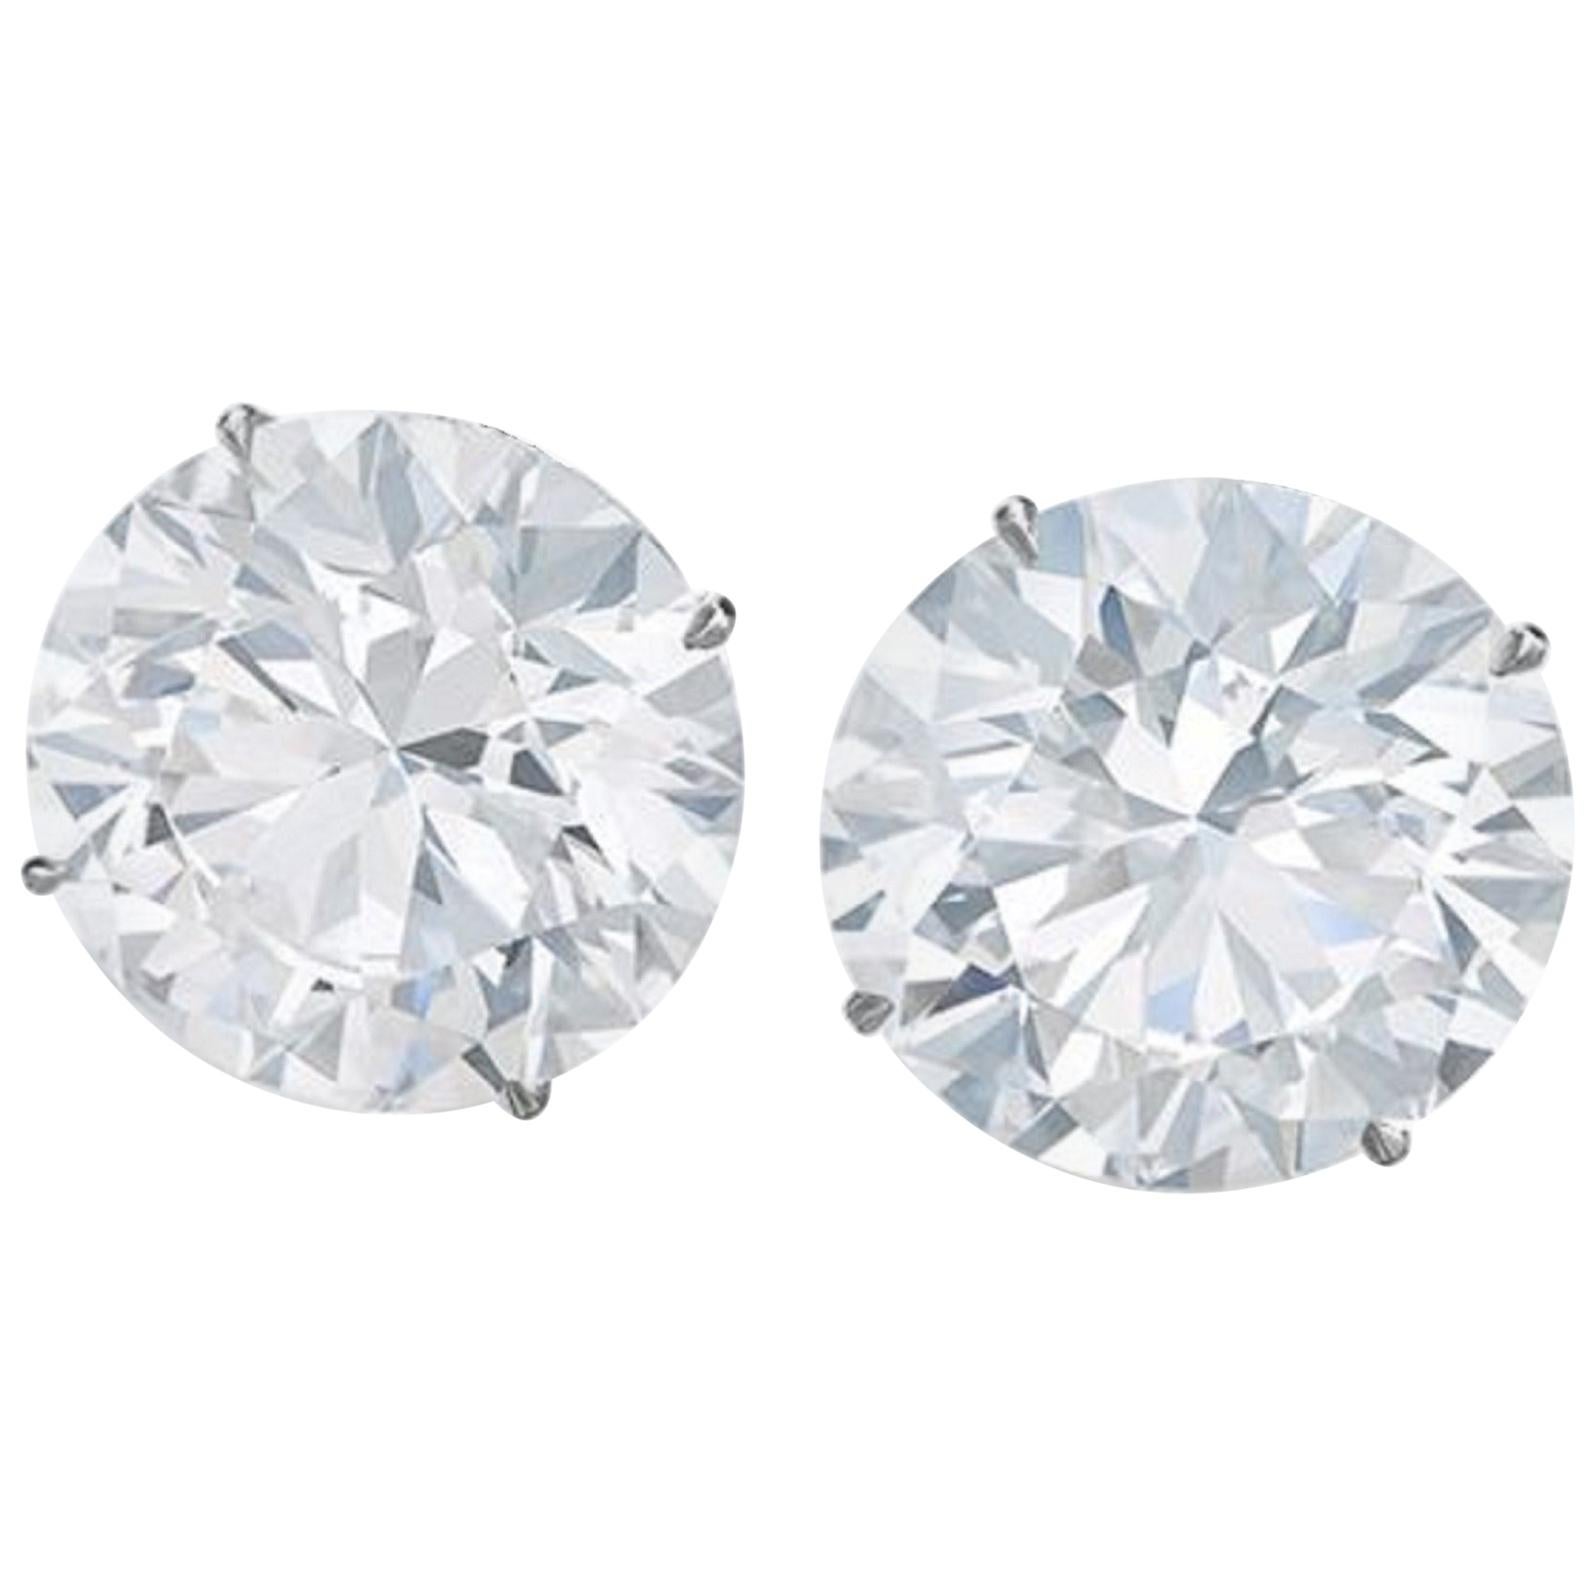 Internally Flawless D/E Color GIA Certified 4.16 Carat Round Diamond Studs